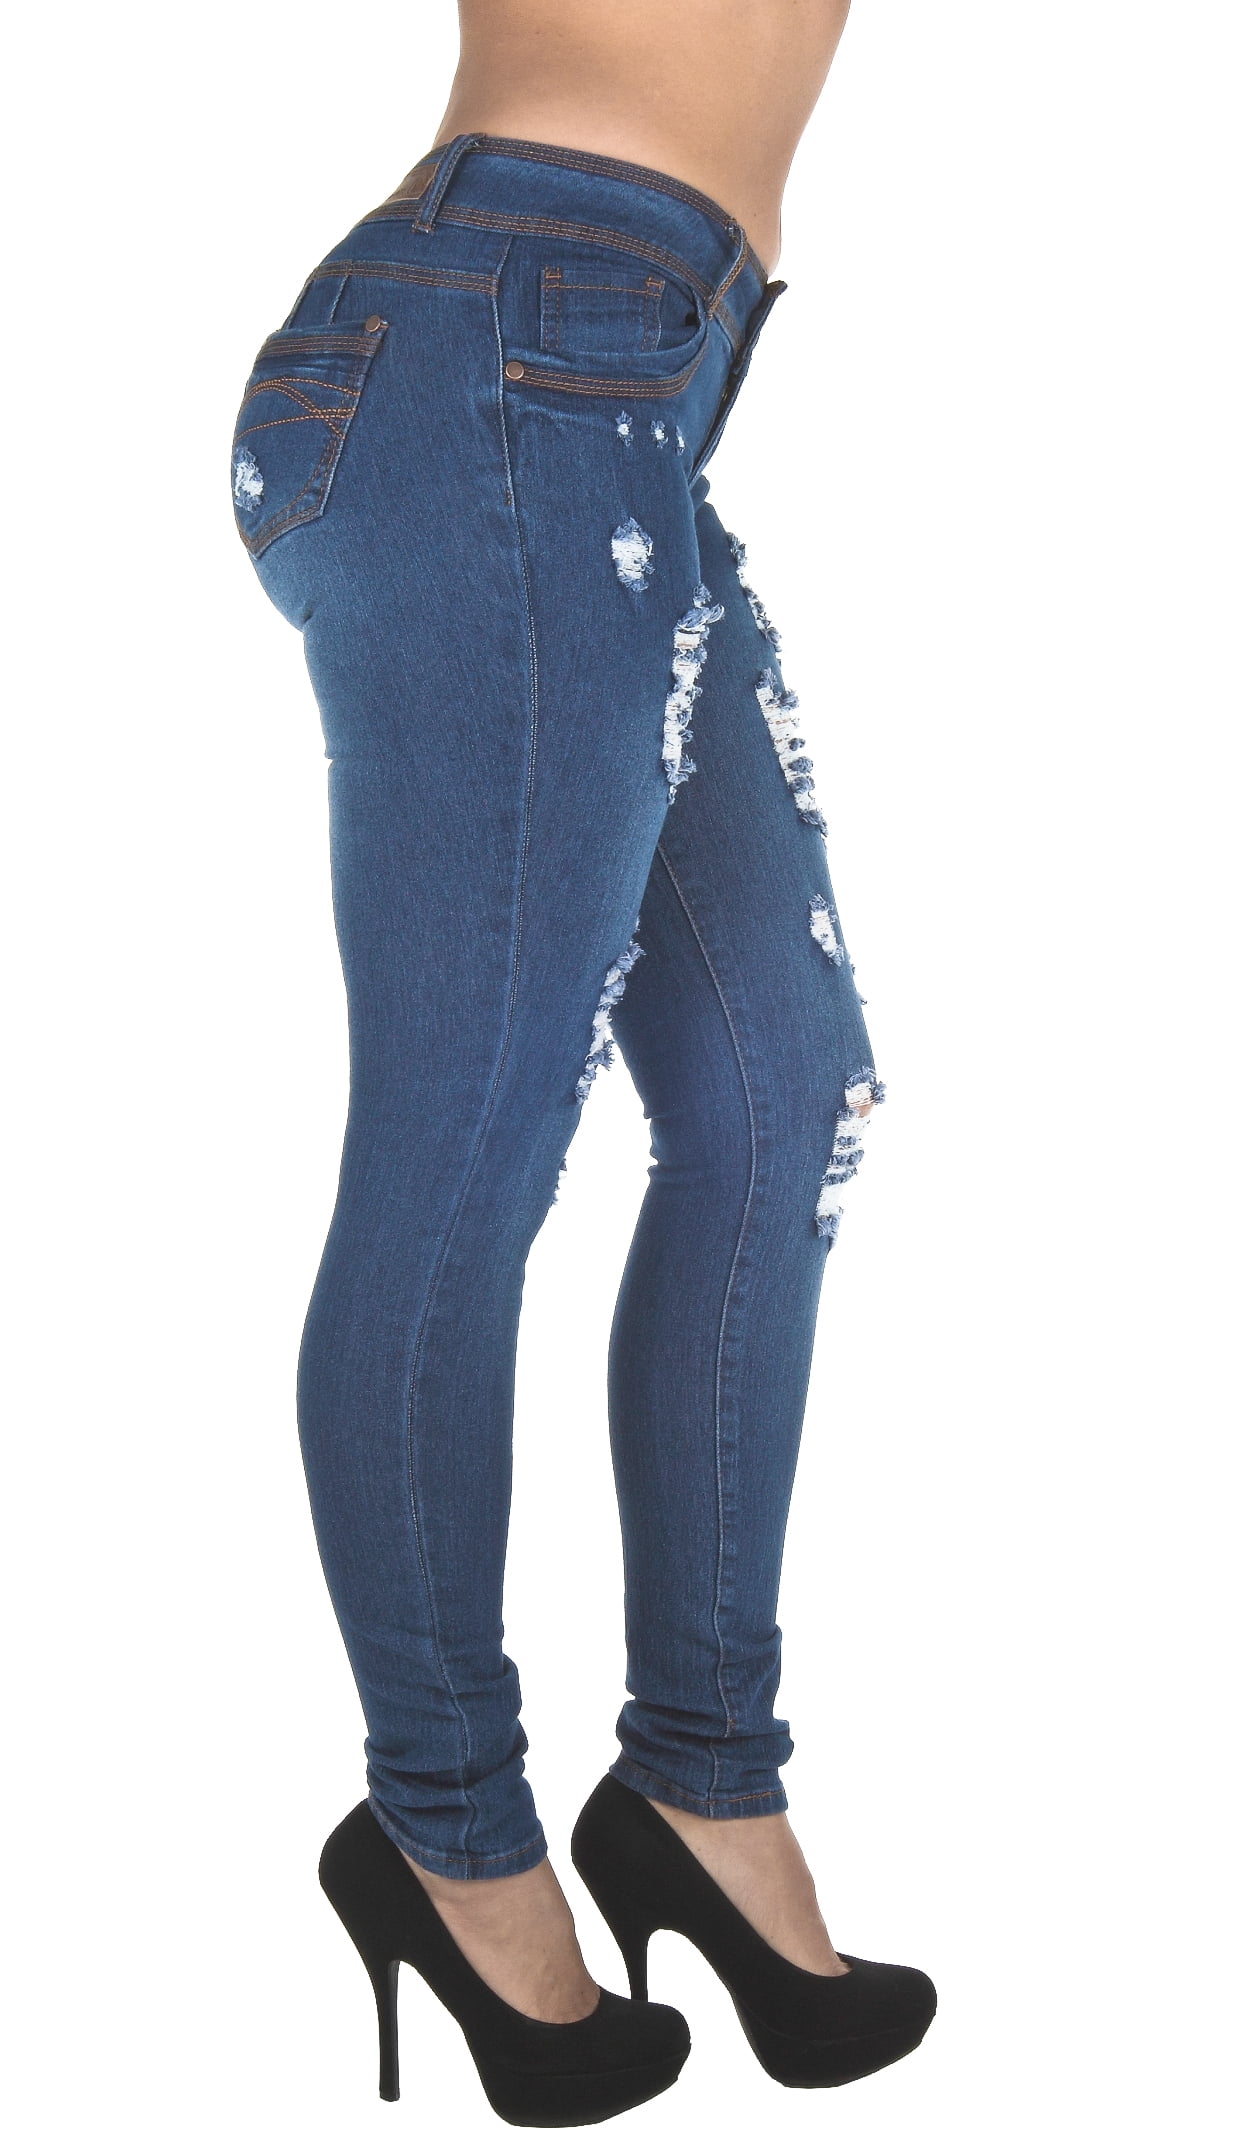 Ankle Jeans Distressed Rip Premium Butt Lift Skinny Jeans 